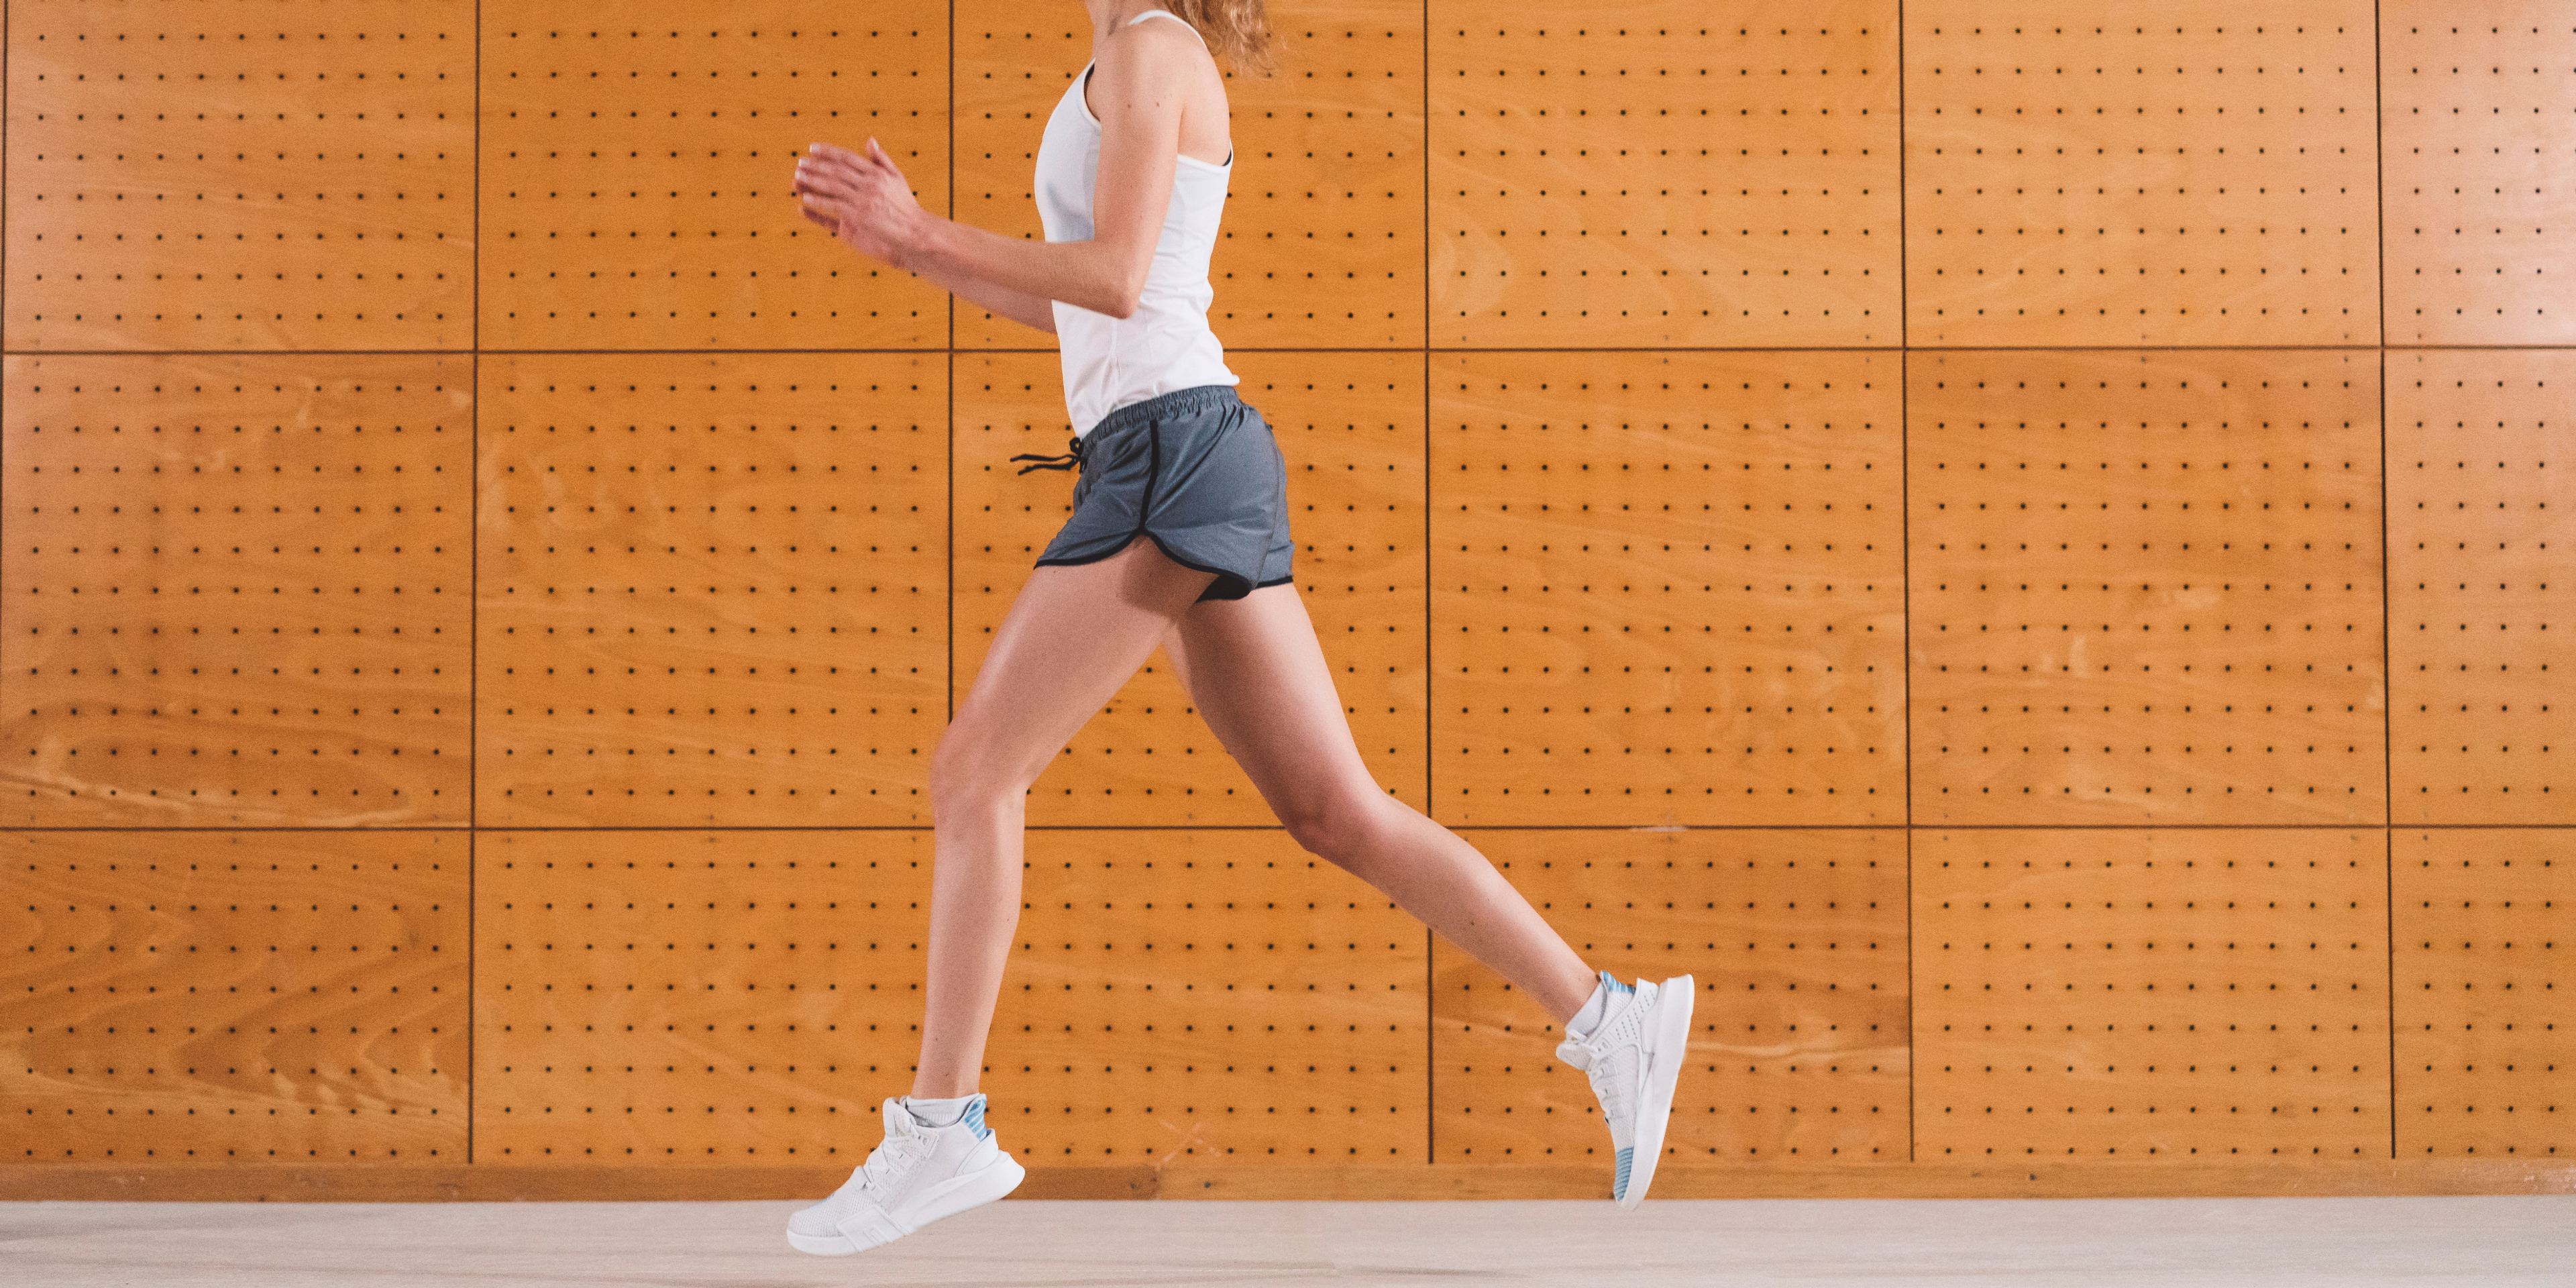 If you do running sports, your final hamstring strain exercises must include plyometrics (jumping and hopping).